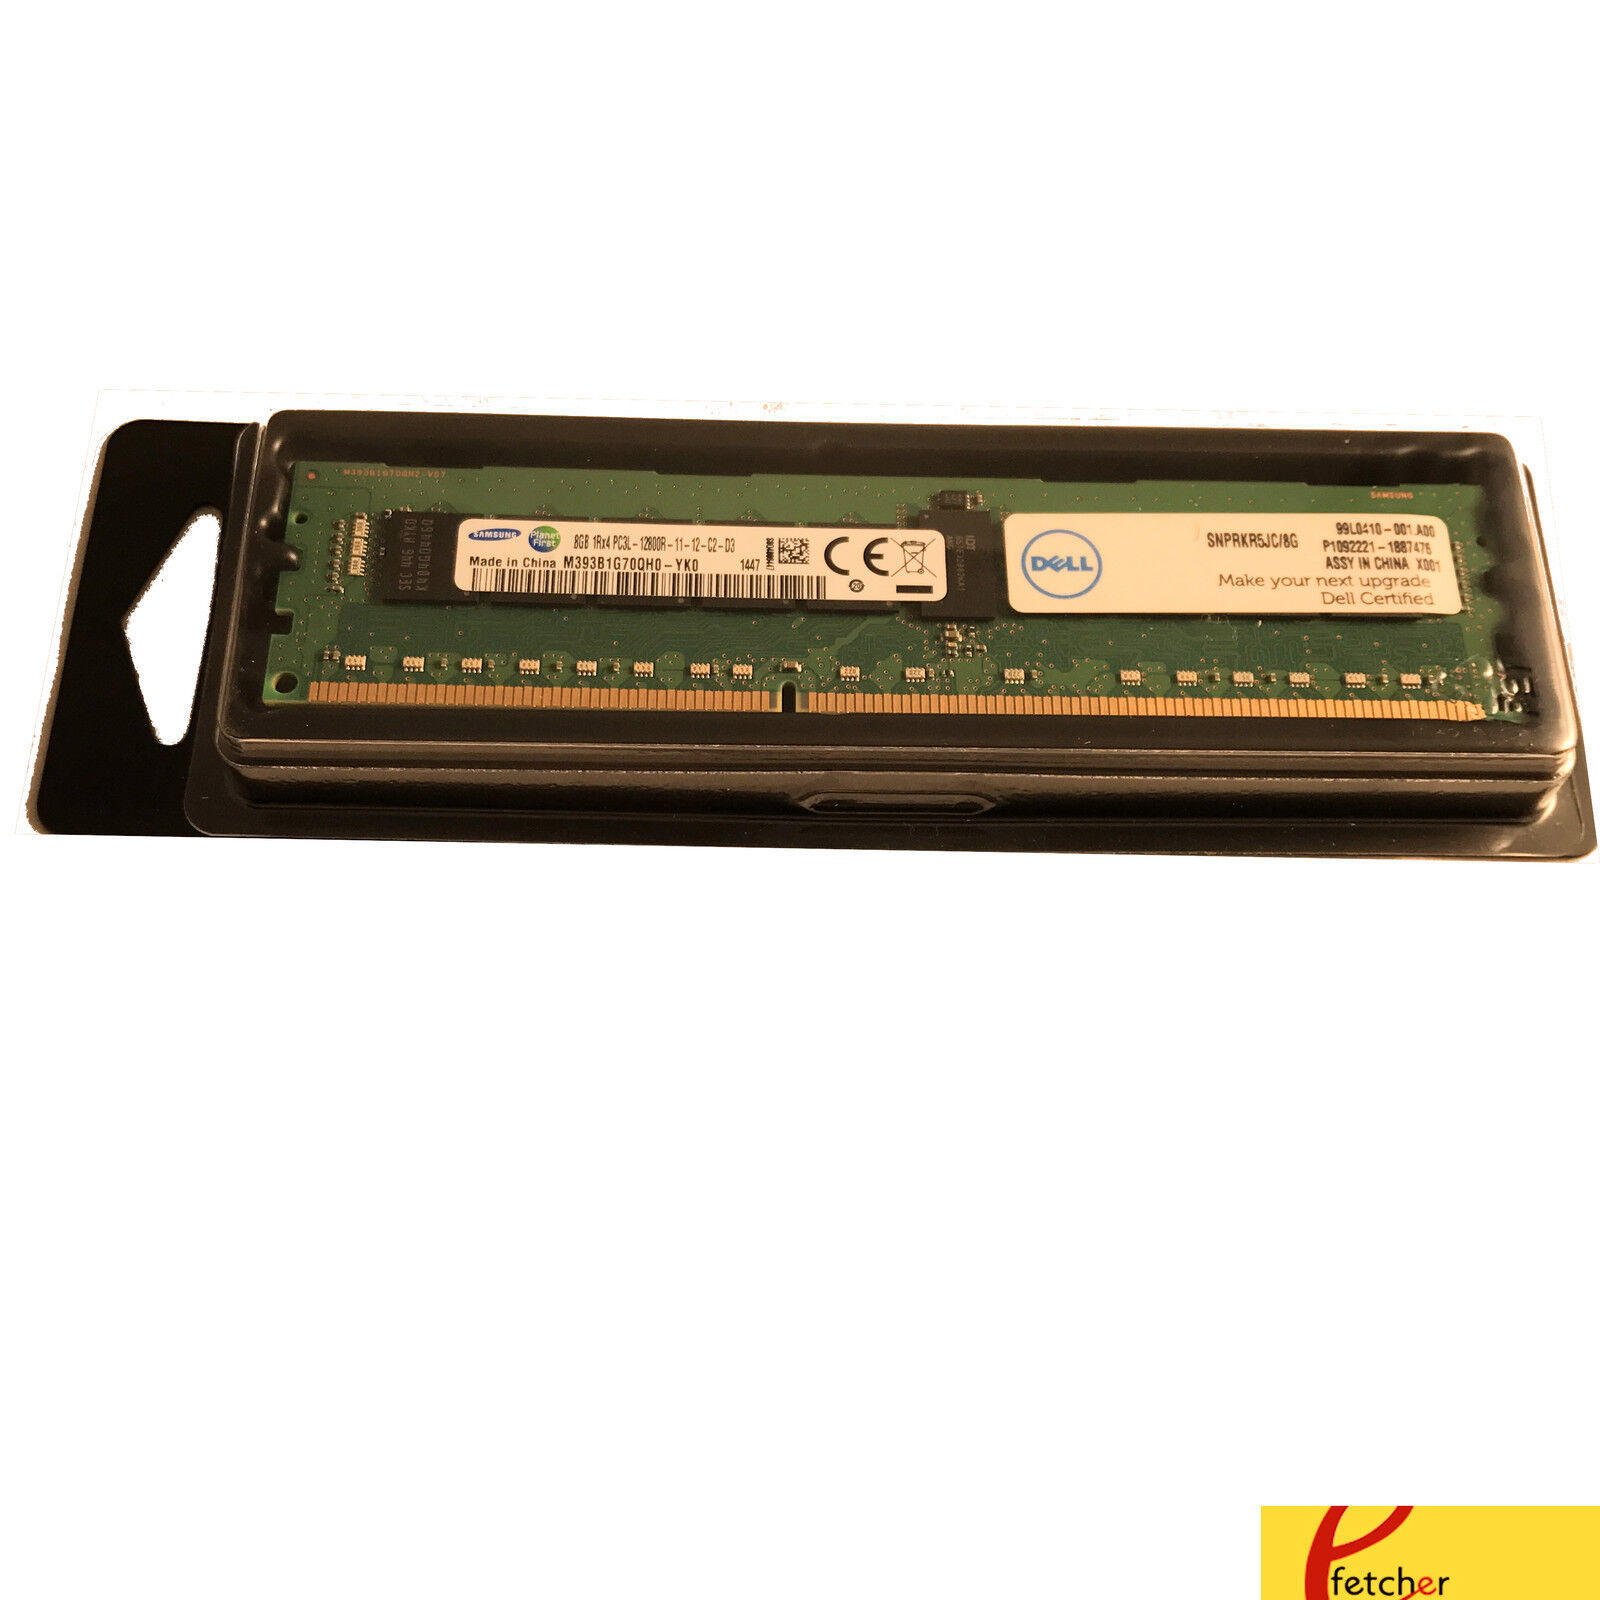 Primary image for A7134886 8G-L1600R-1Rx4 Memory Dell PowerEdge C6105 C6145 C8220 M420 M520 M620